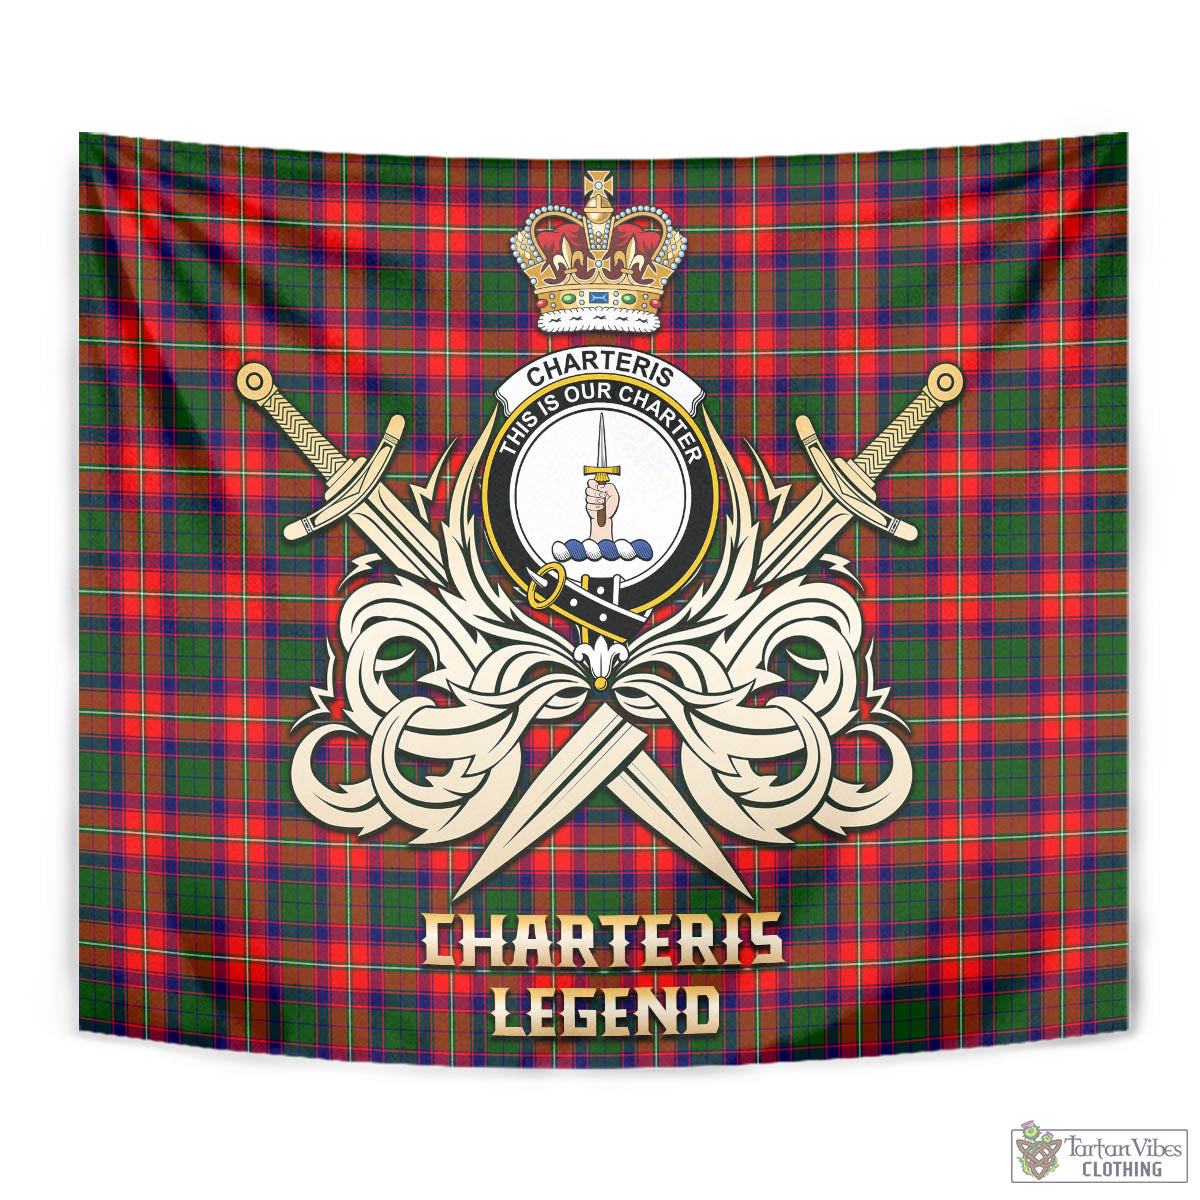 Tartan Vibes Clothing Charteris Tartan Tapestry with Clan Crest and the Golden Sword of Courageous Legacy